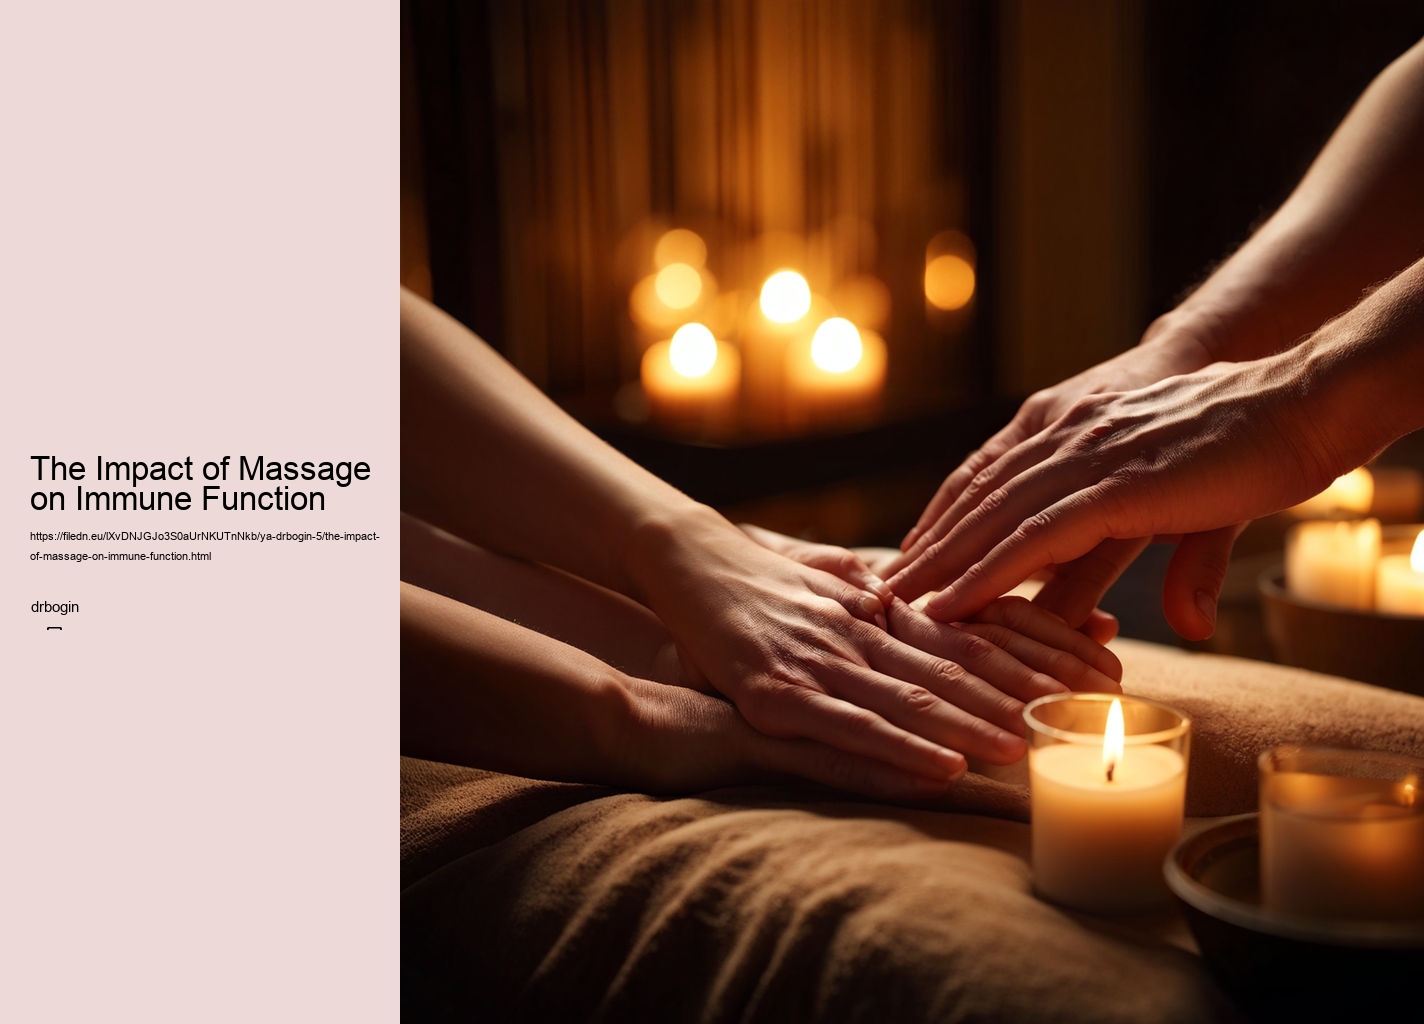 The Impact of Massage on Immune Function